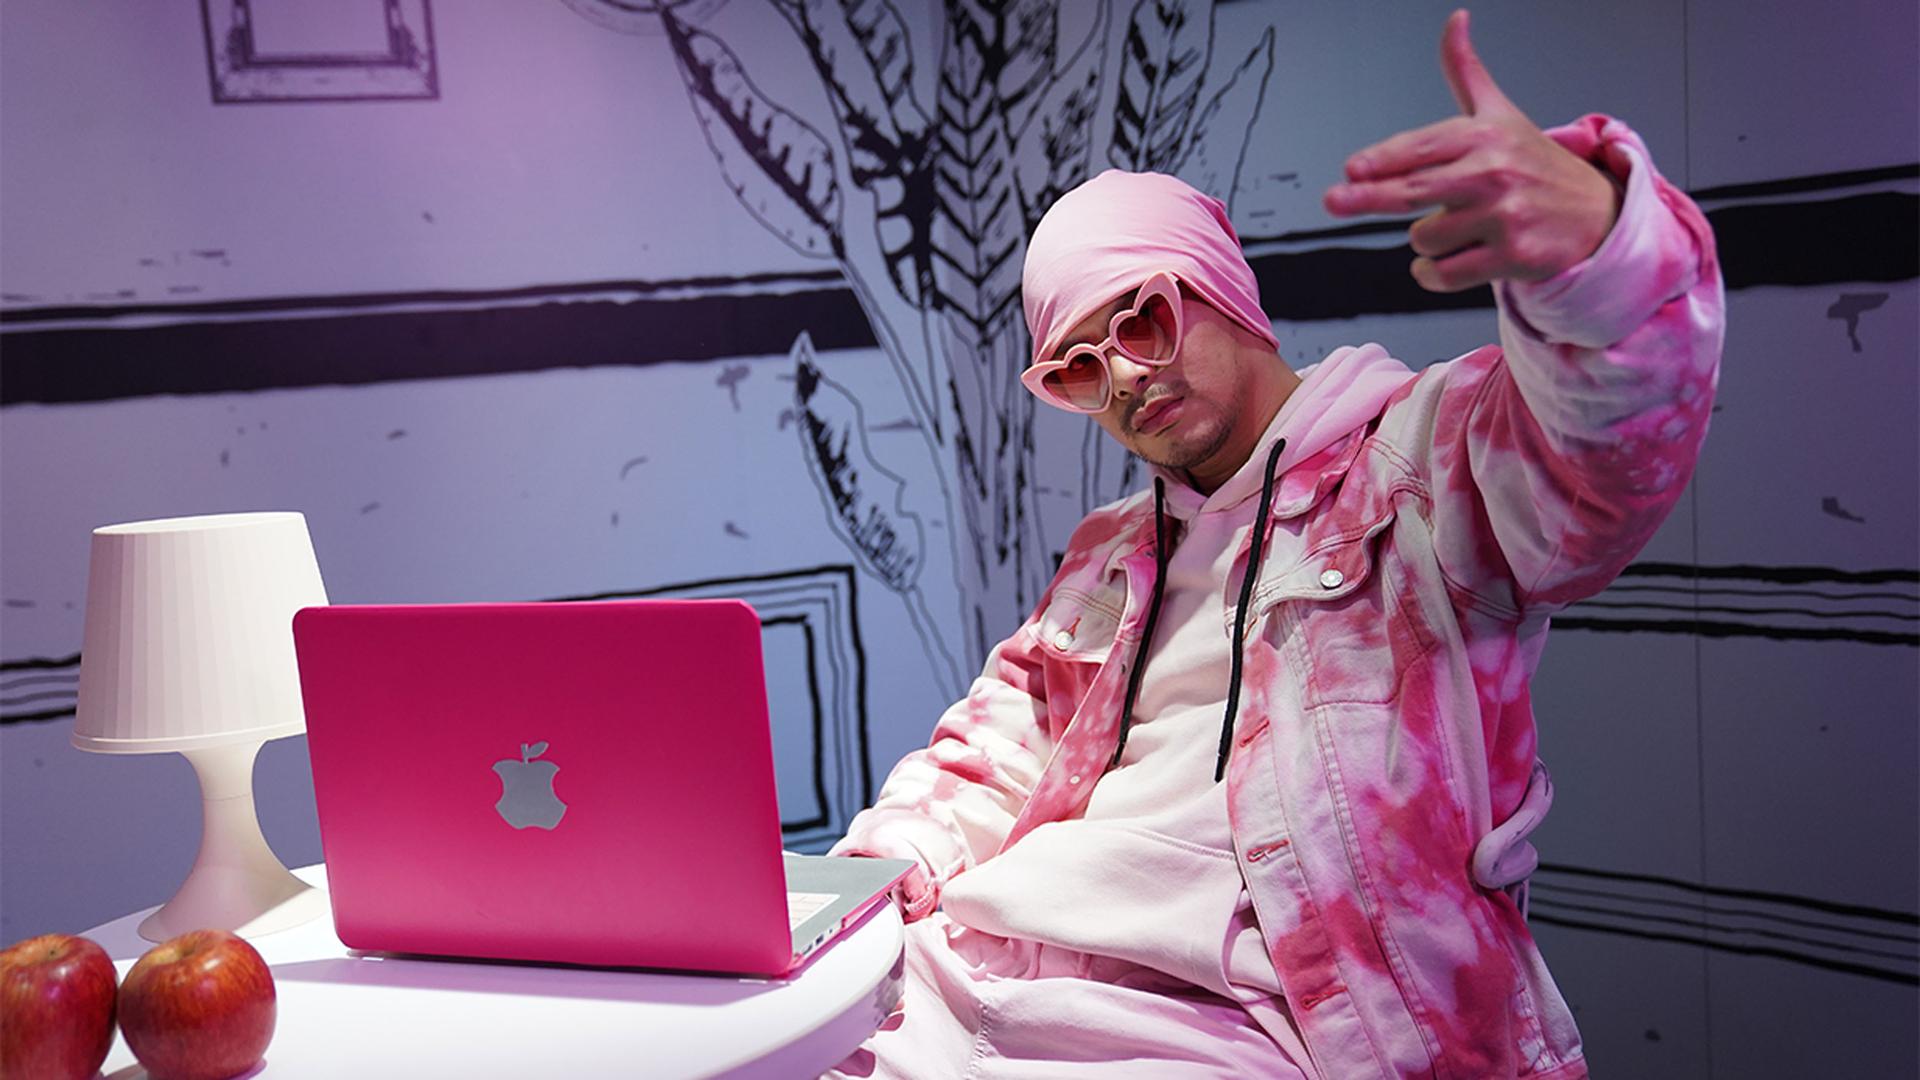 Namewee is a Malaysian Chinese singer-songwriter and filmmaker whose controversial songs go viral on Youtube.